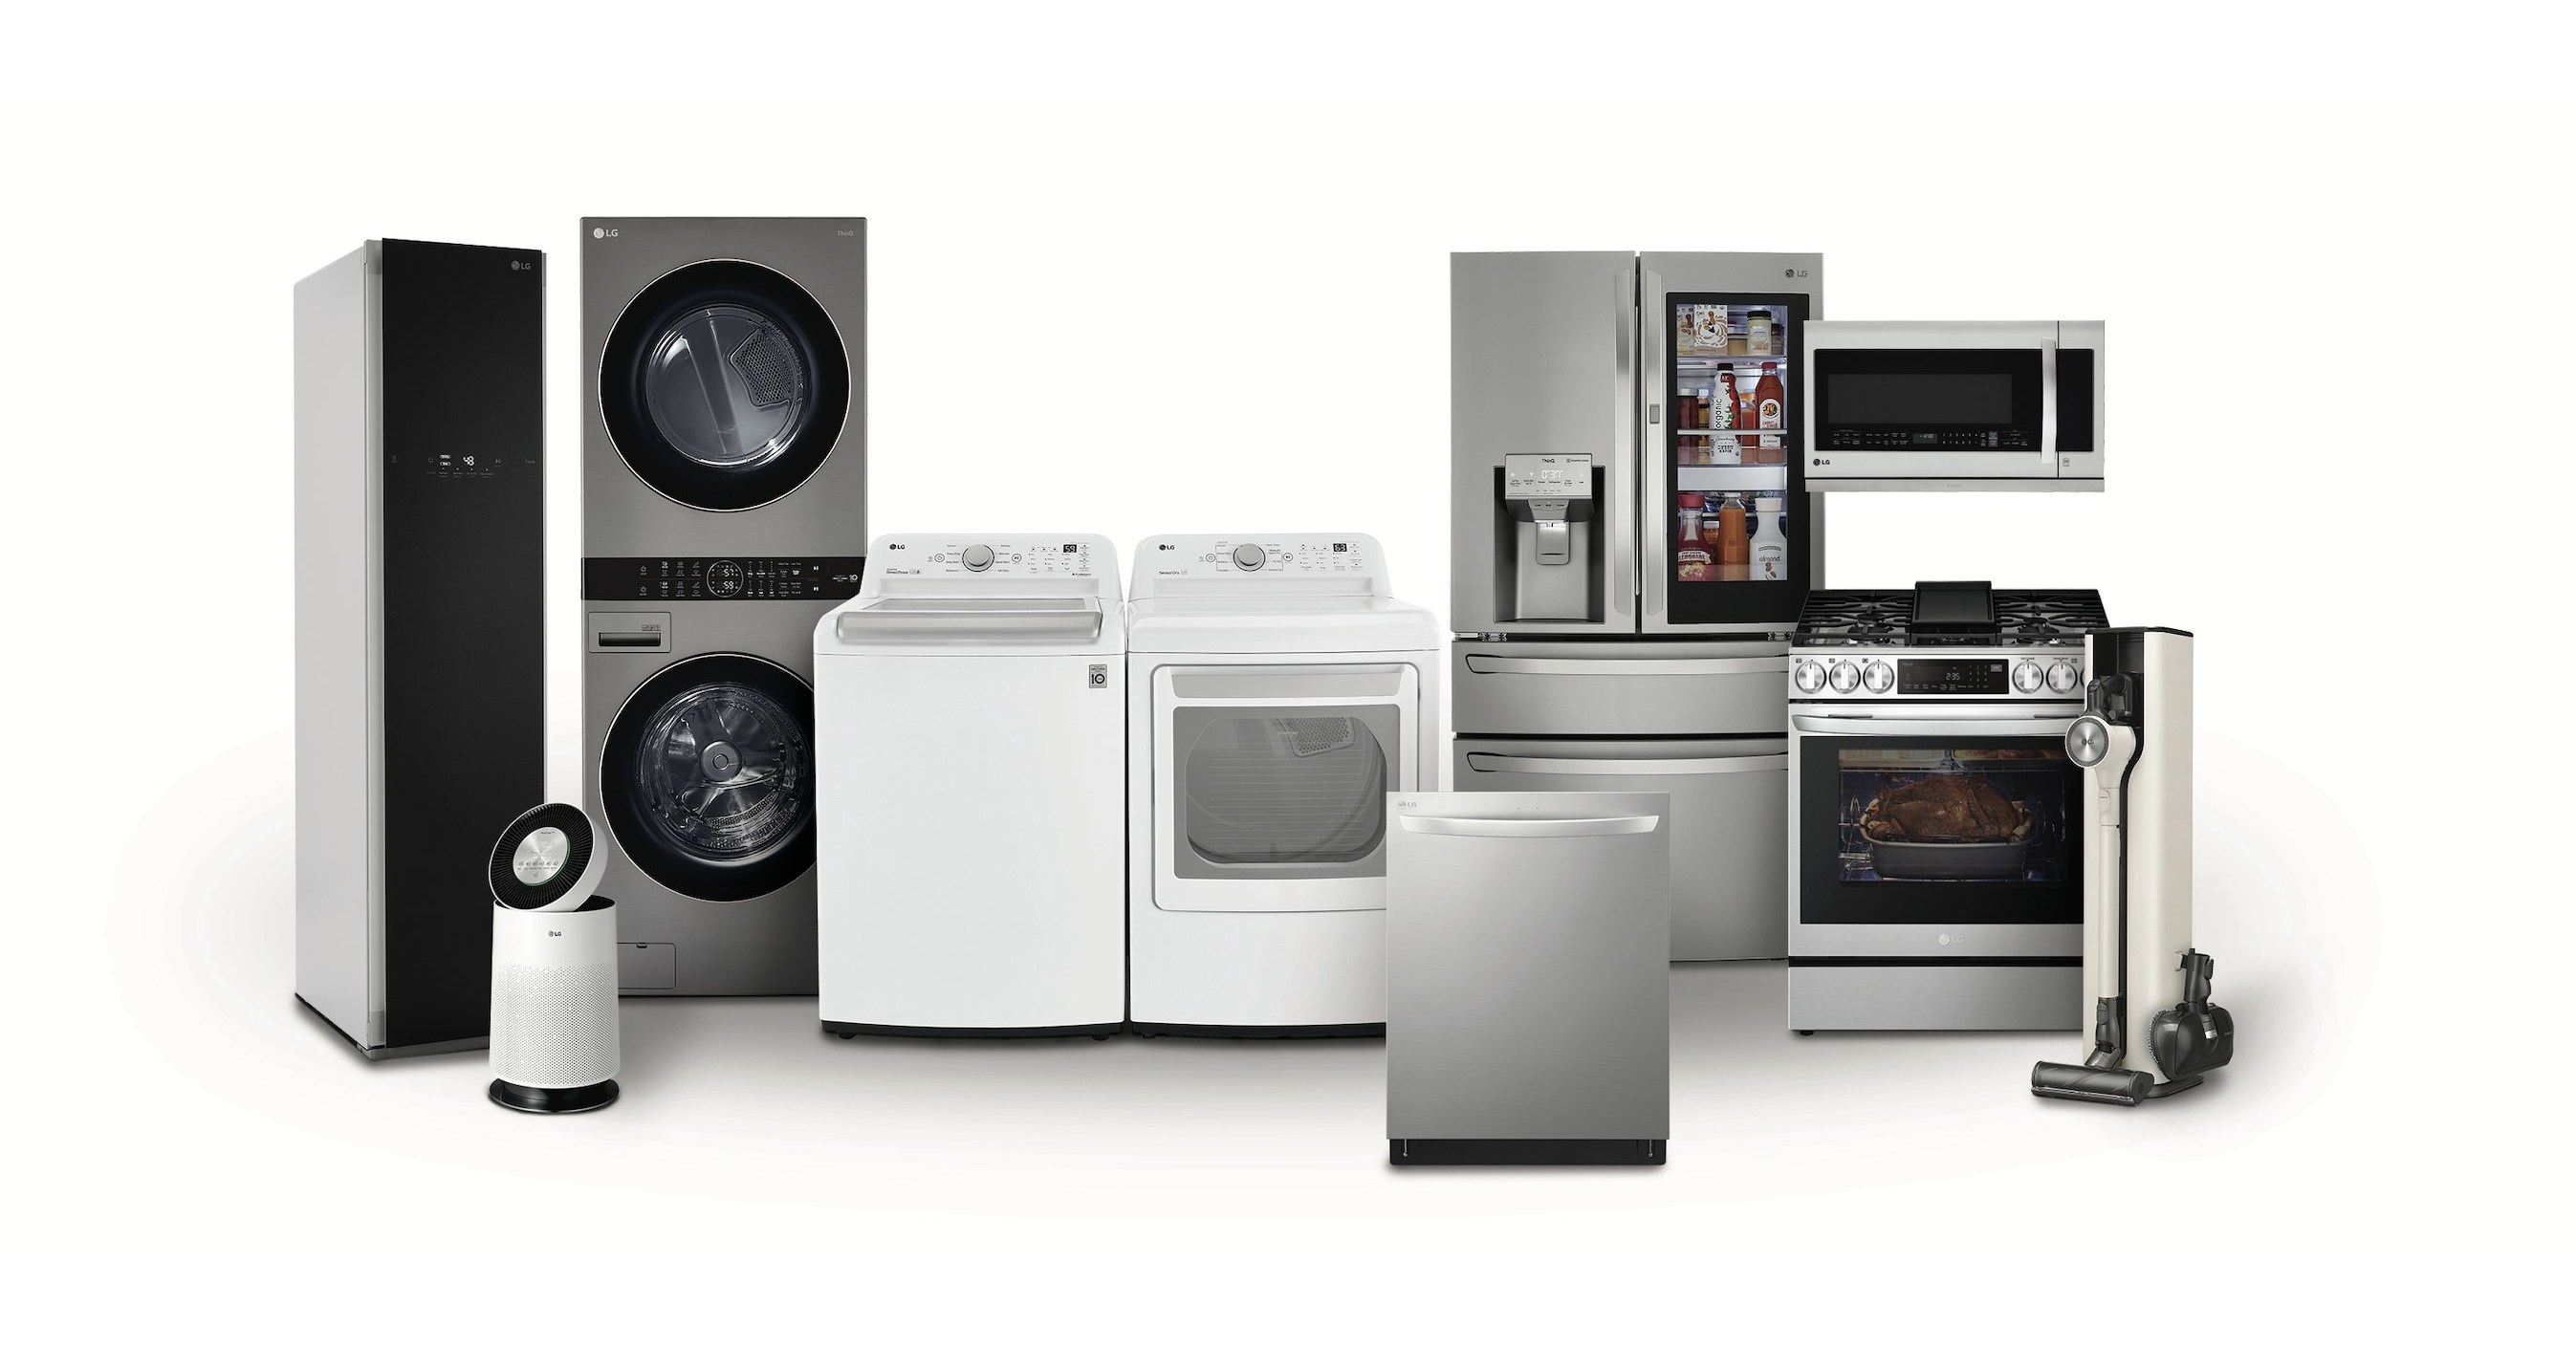 LG DELIVERS BIG SAVINGS ON HOME APPLIANCES THIS PRESIDENTS' DAY